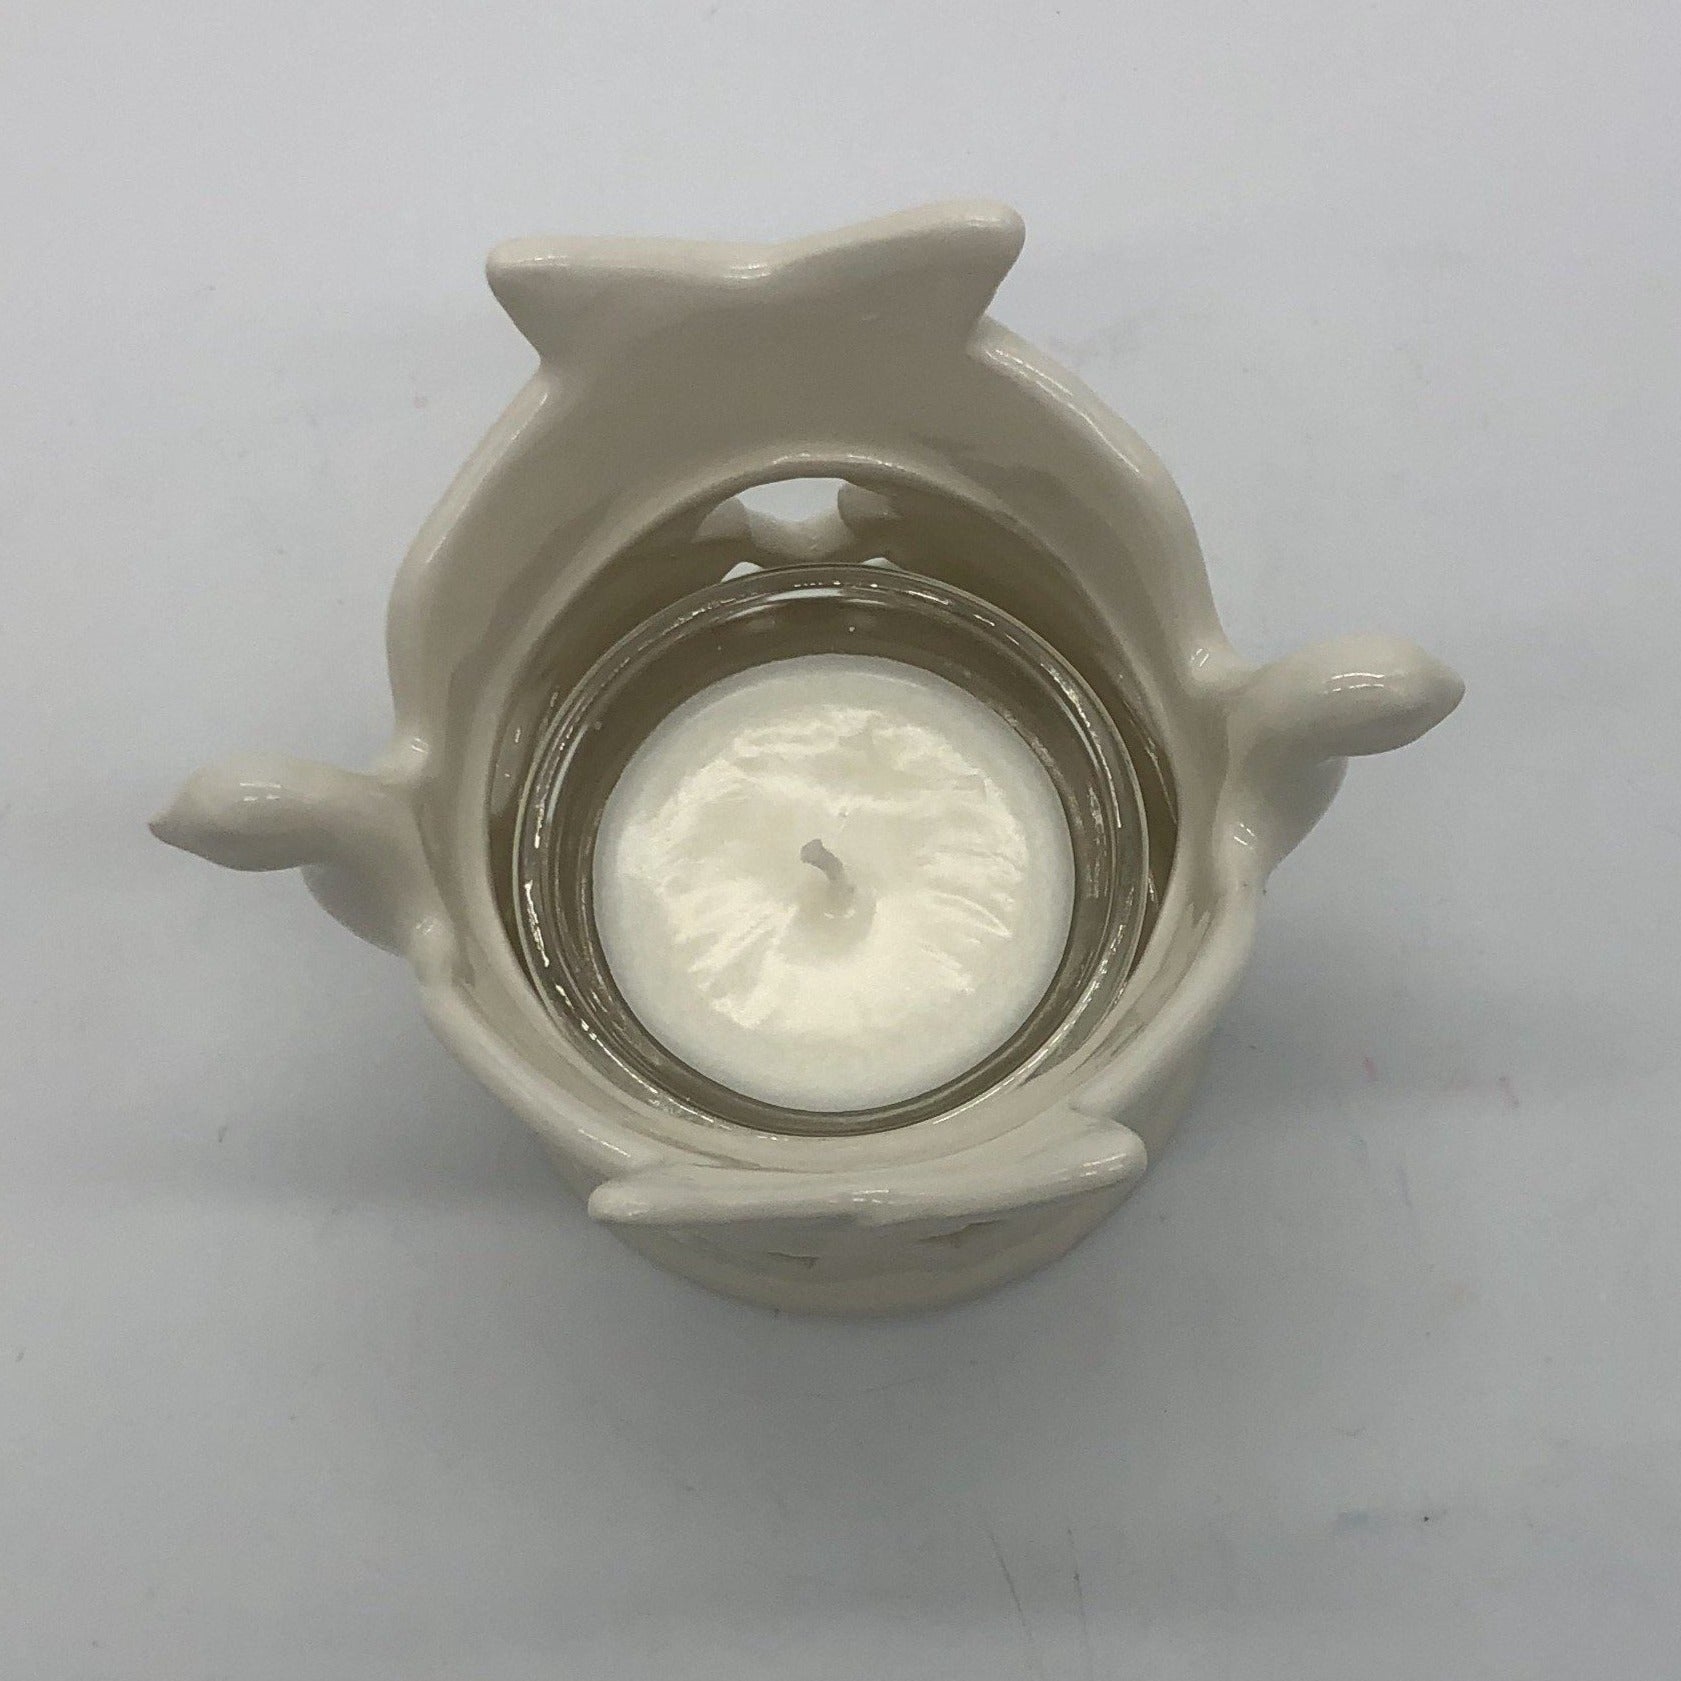 Top view of ceramic dove votive holder with white votive candle inside.